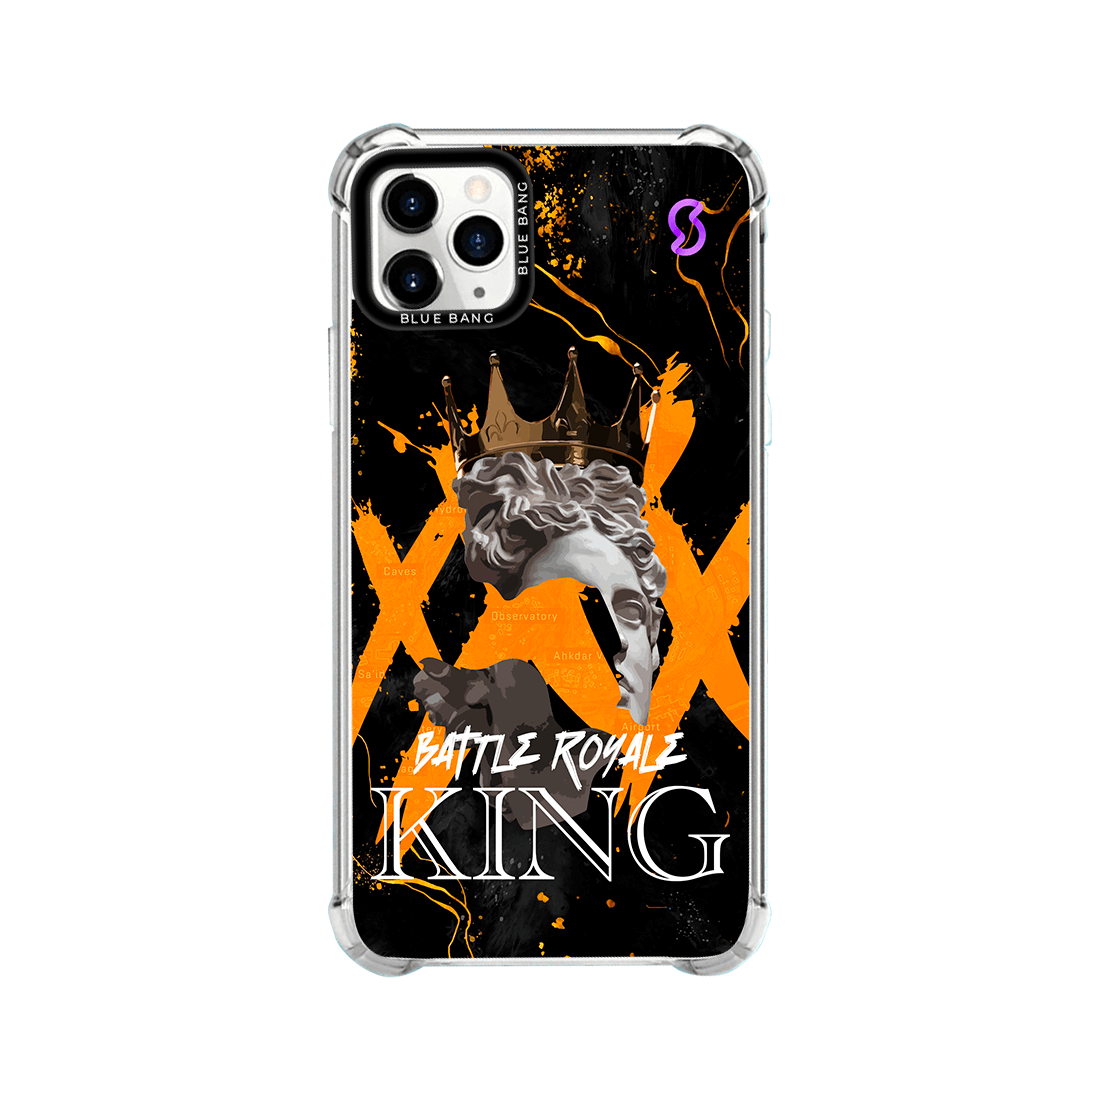 Battle royal king holographic cell phone case